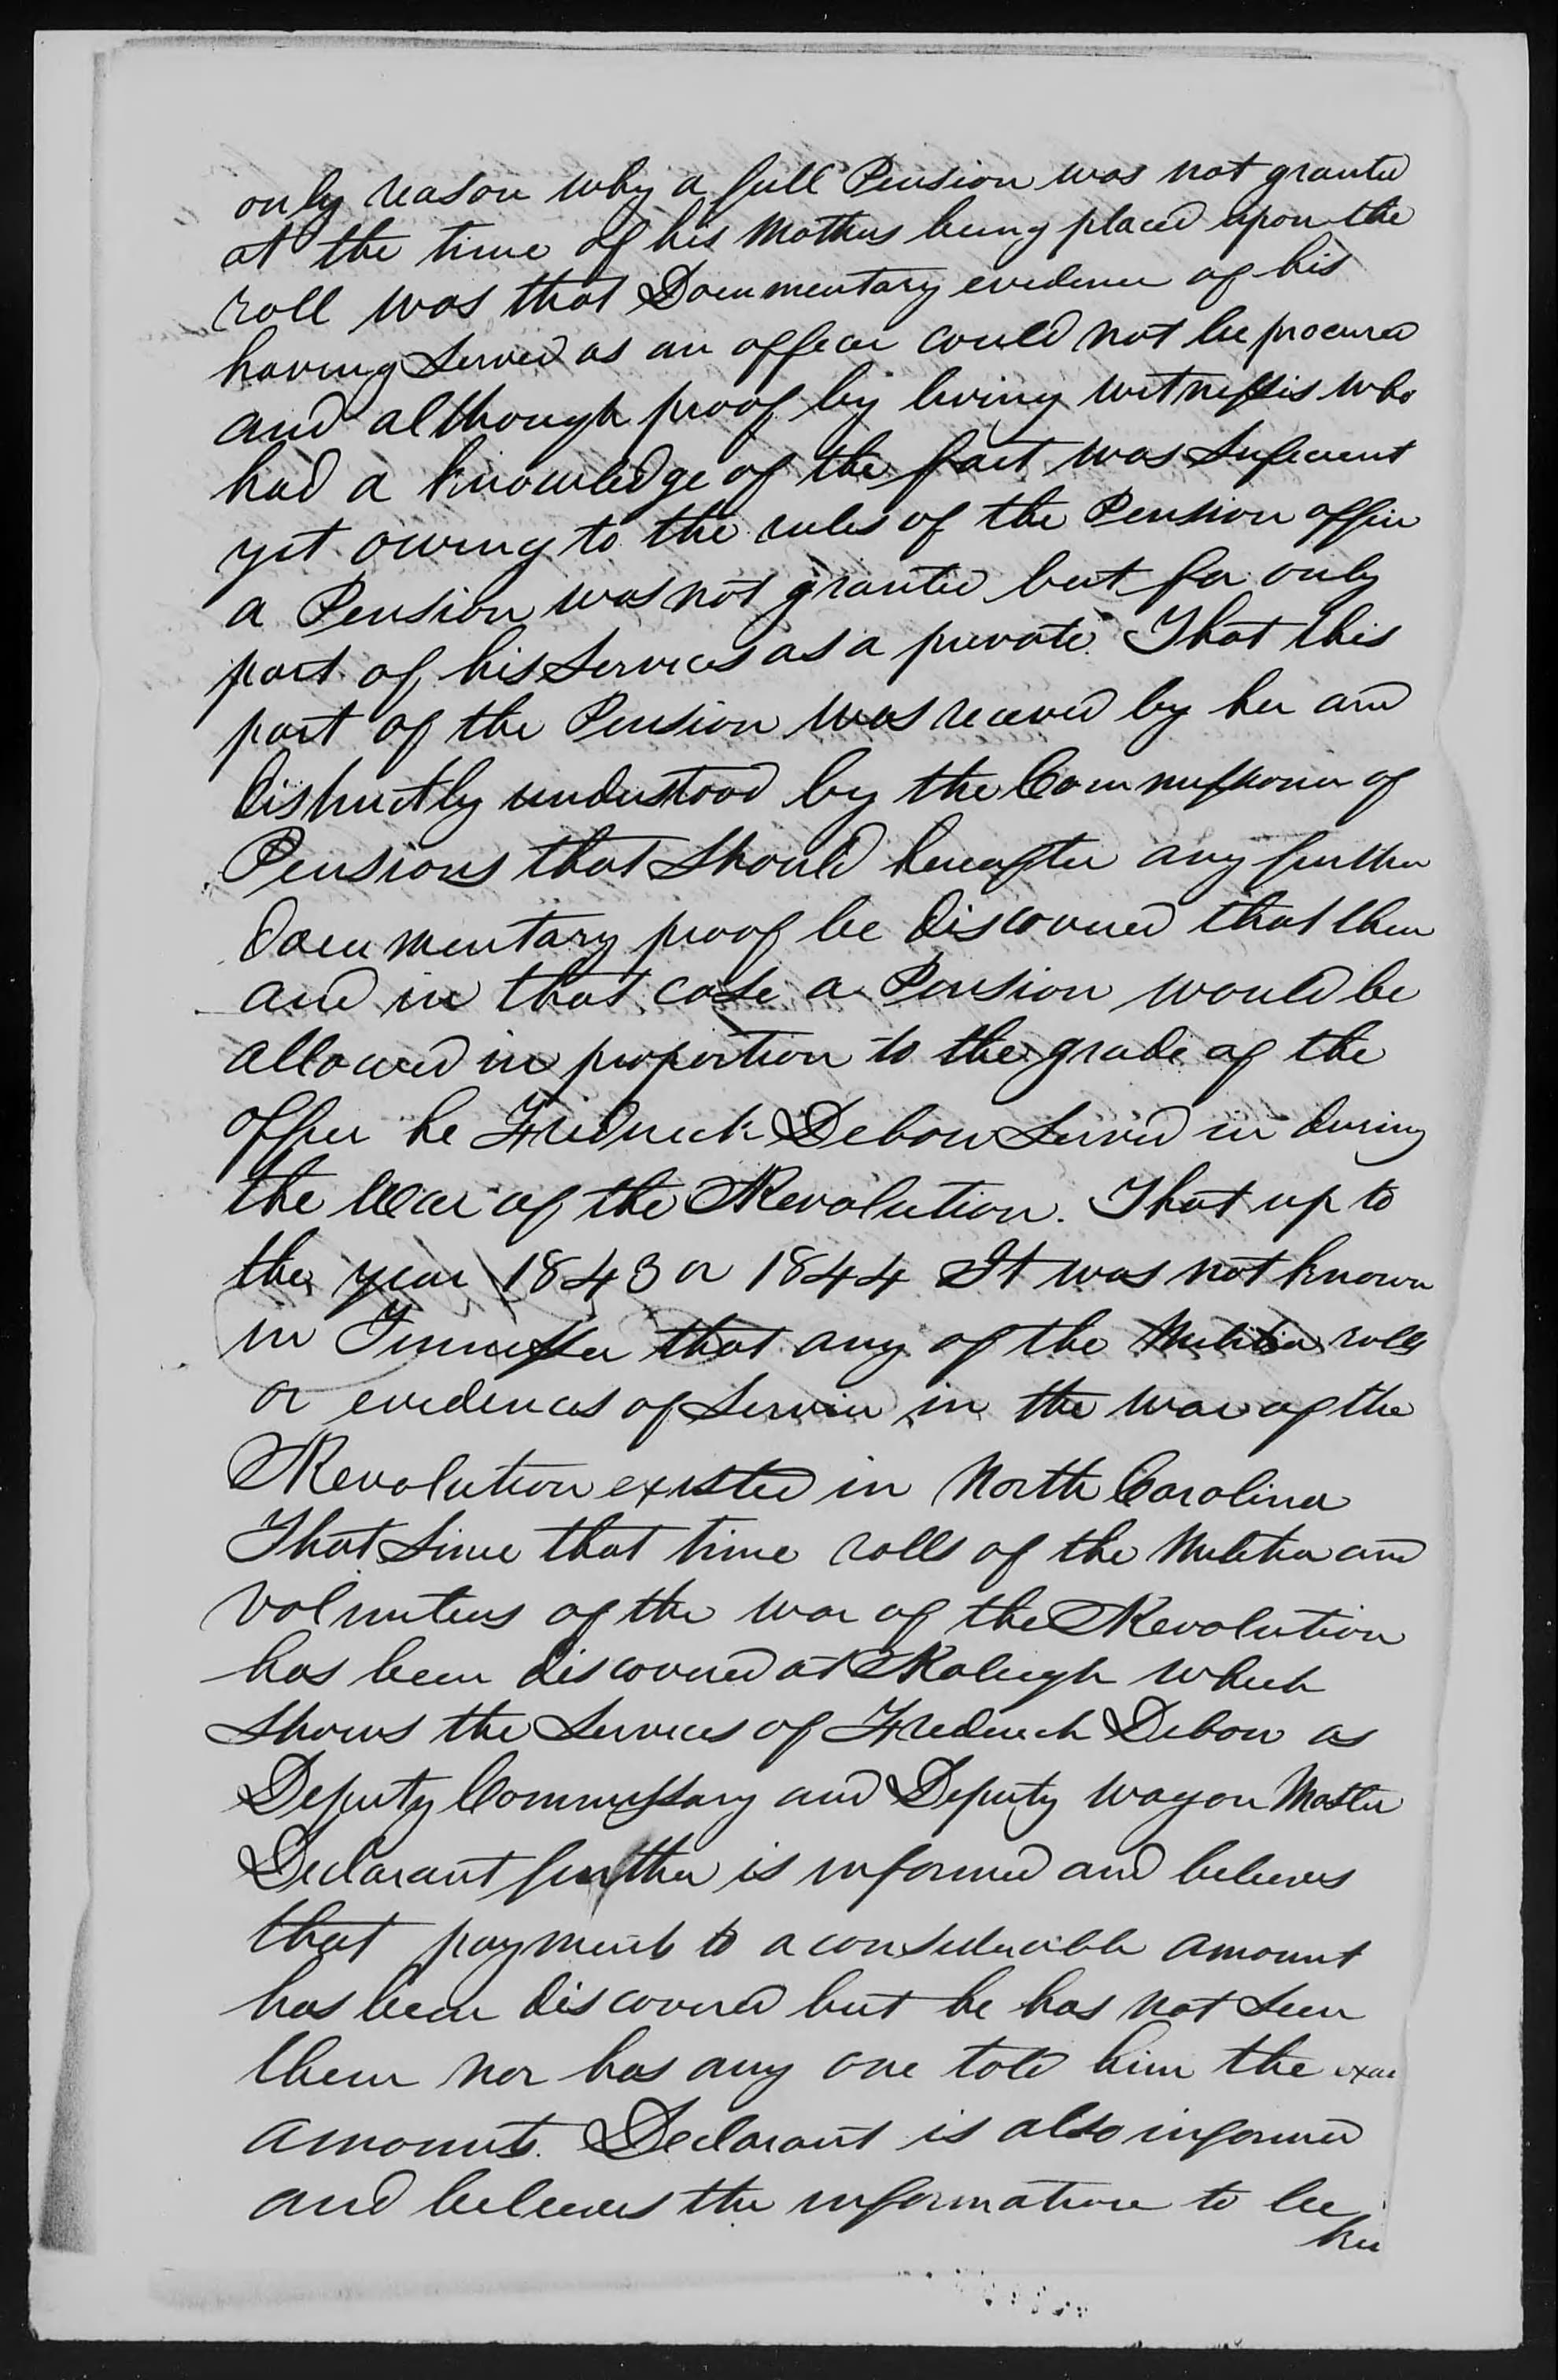 Declaration of John A. Debow to the U.S. Pension Office, 18 August 1851, page 2